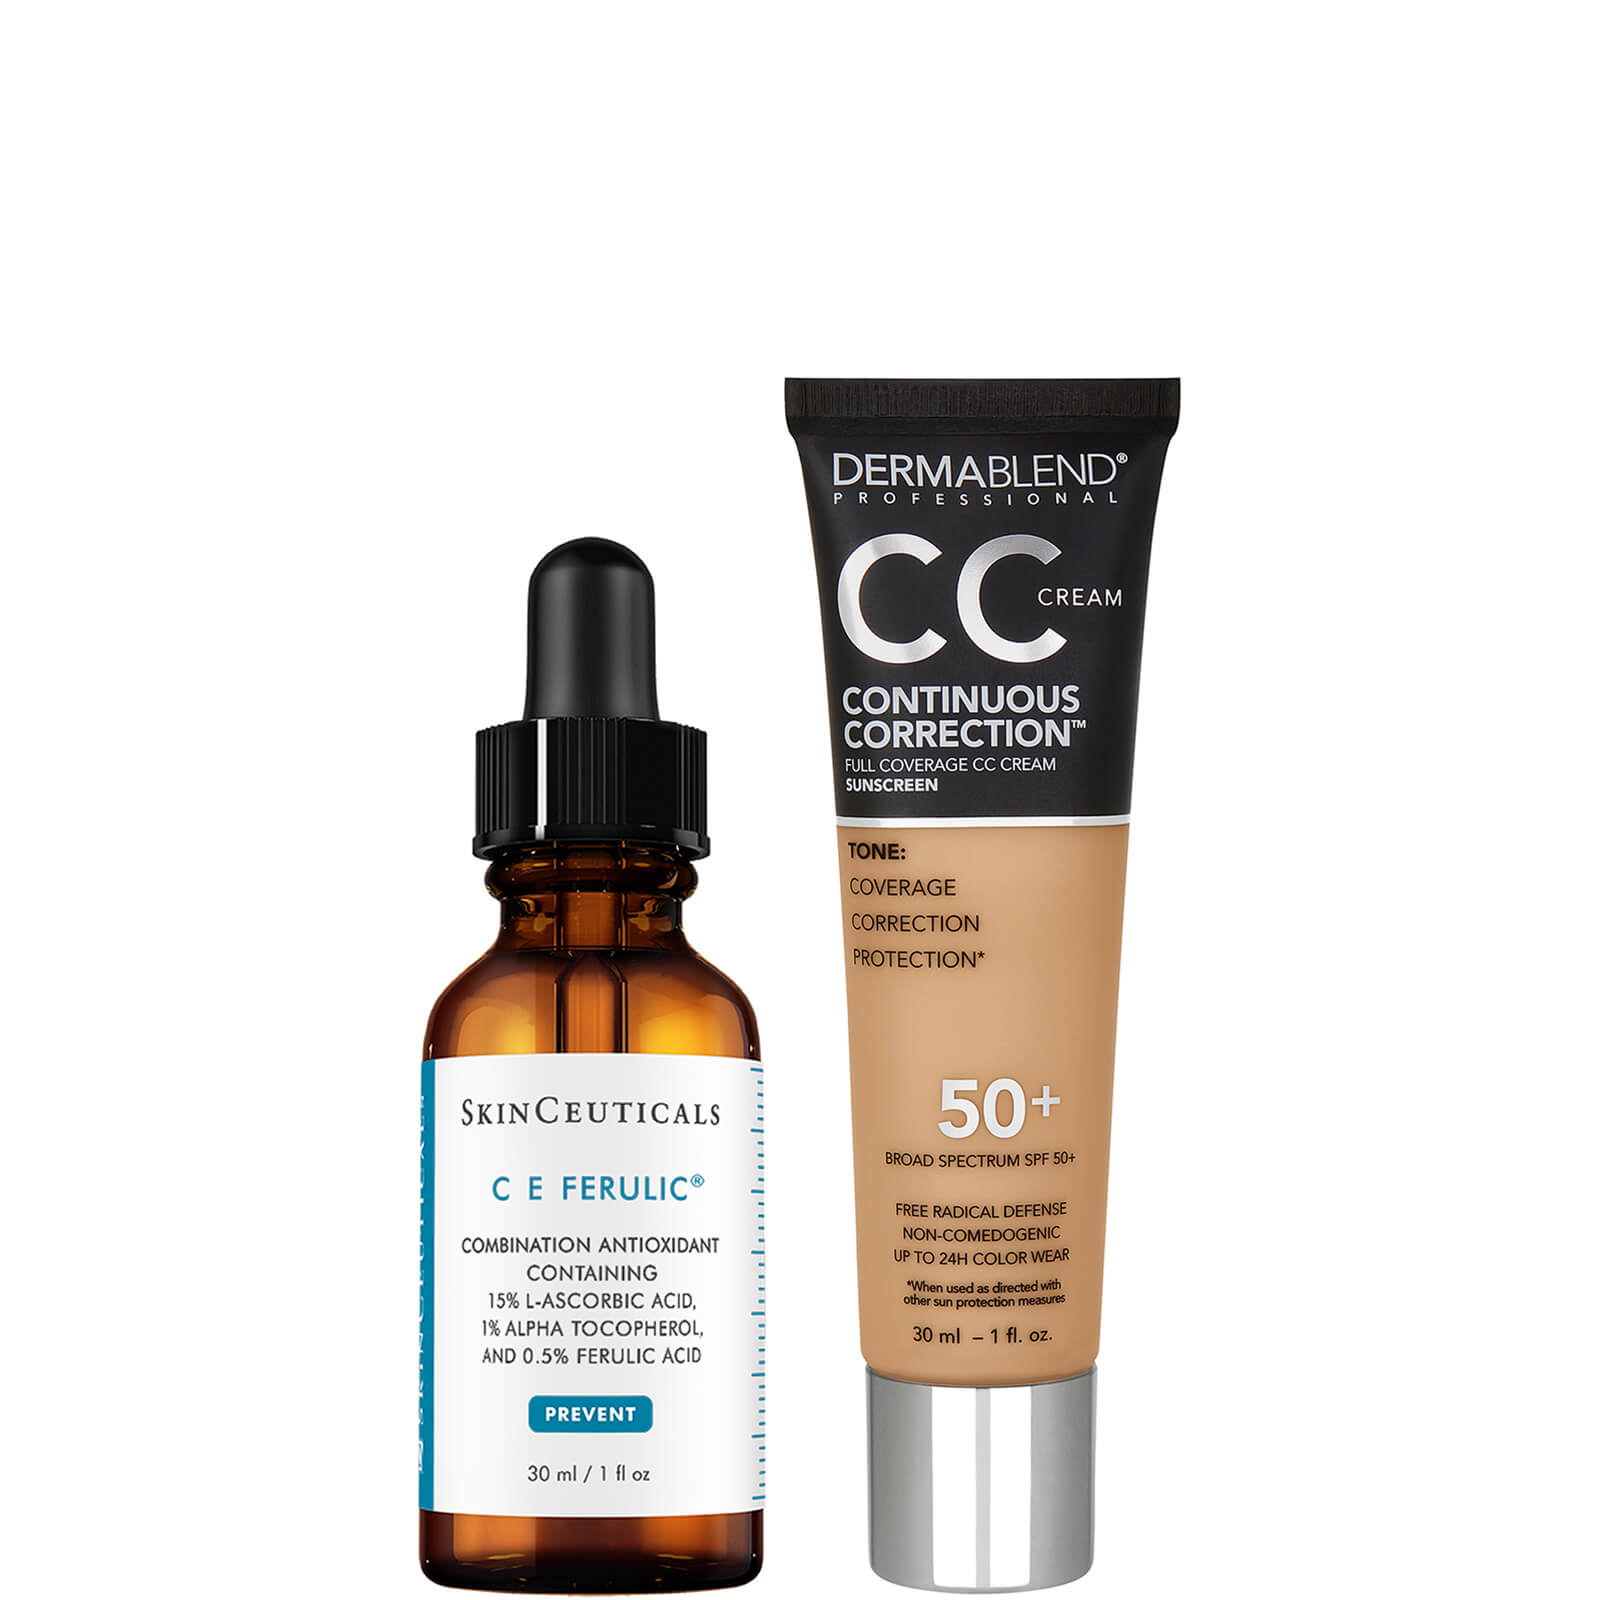 SkinCeuticals and Dermablend Anti-Aging Brightening Duo with Vitamin C and Niacinamide (Various Shades) ($223 Value) - 43N Medium 3